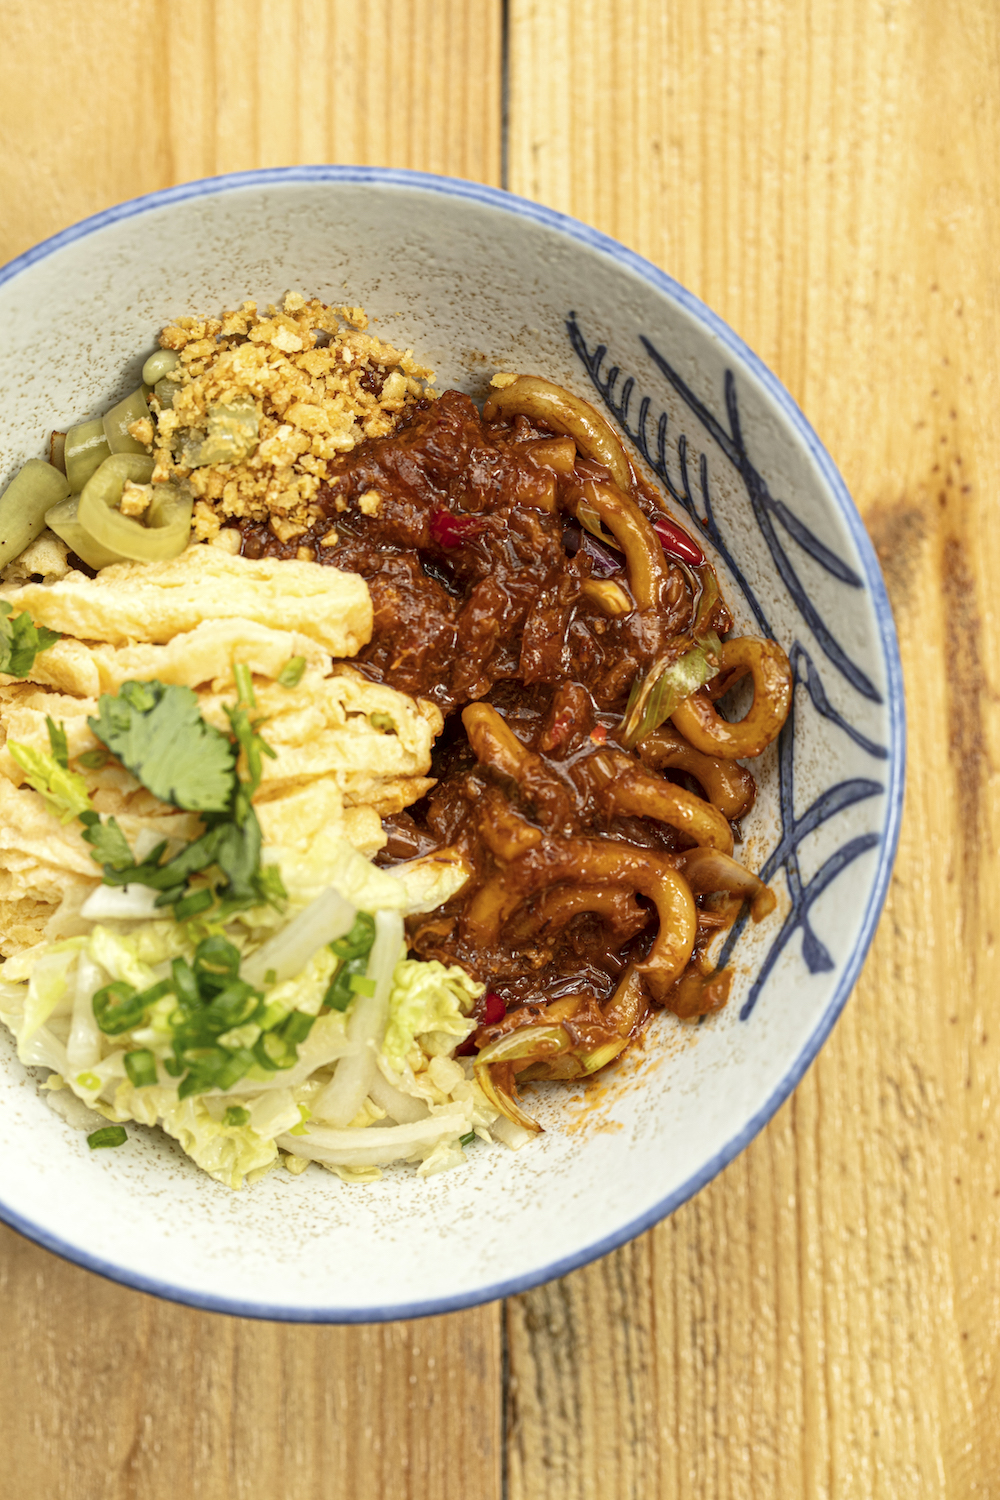 Crab-udon: Stir-fried udon noodles with chili crab, onion, and leeks